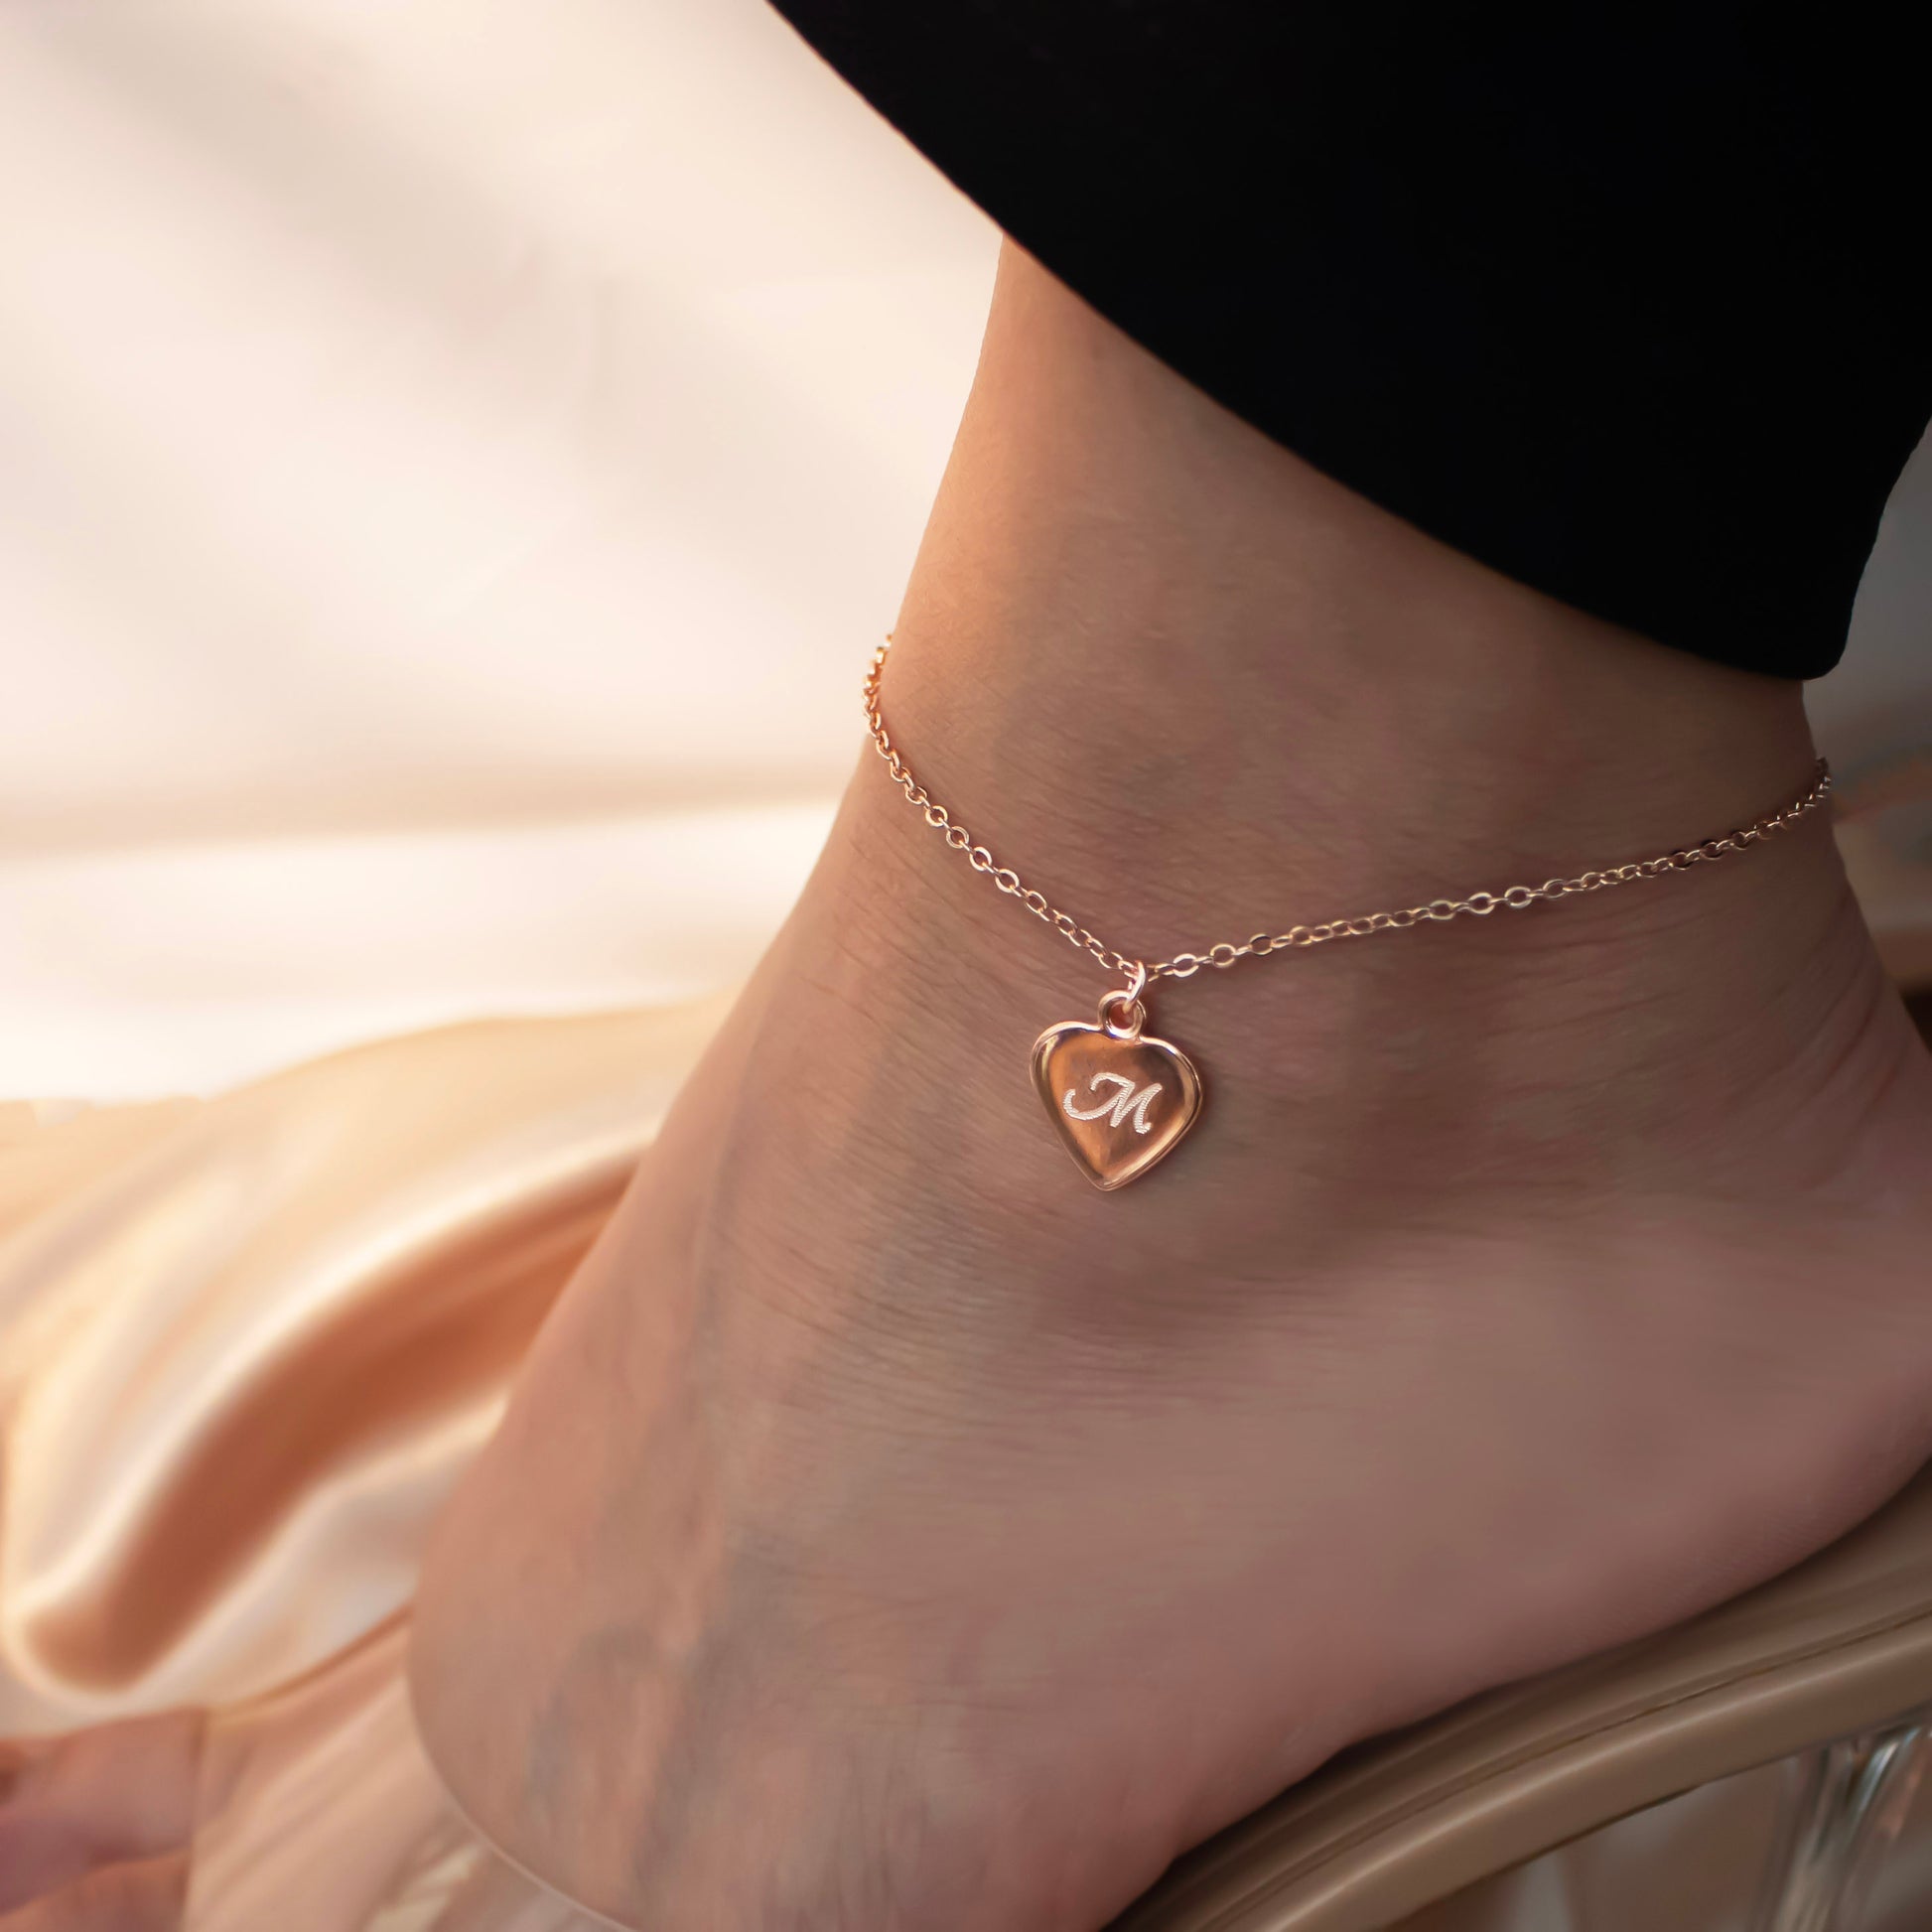 Buy Dainty 16K Gold Heart Anklet at Petite Boutique